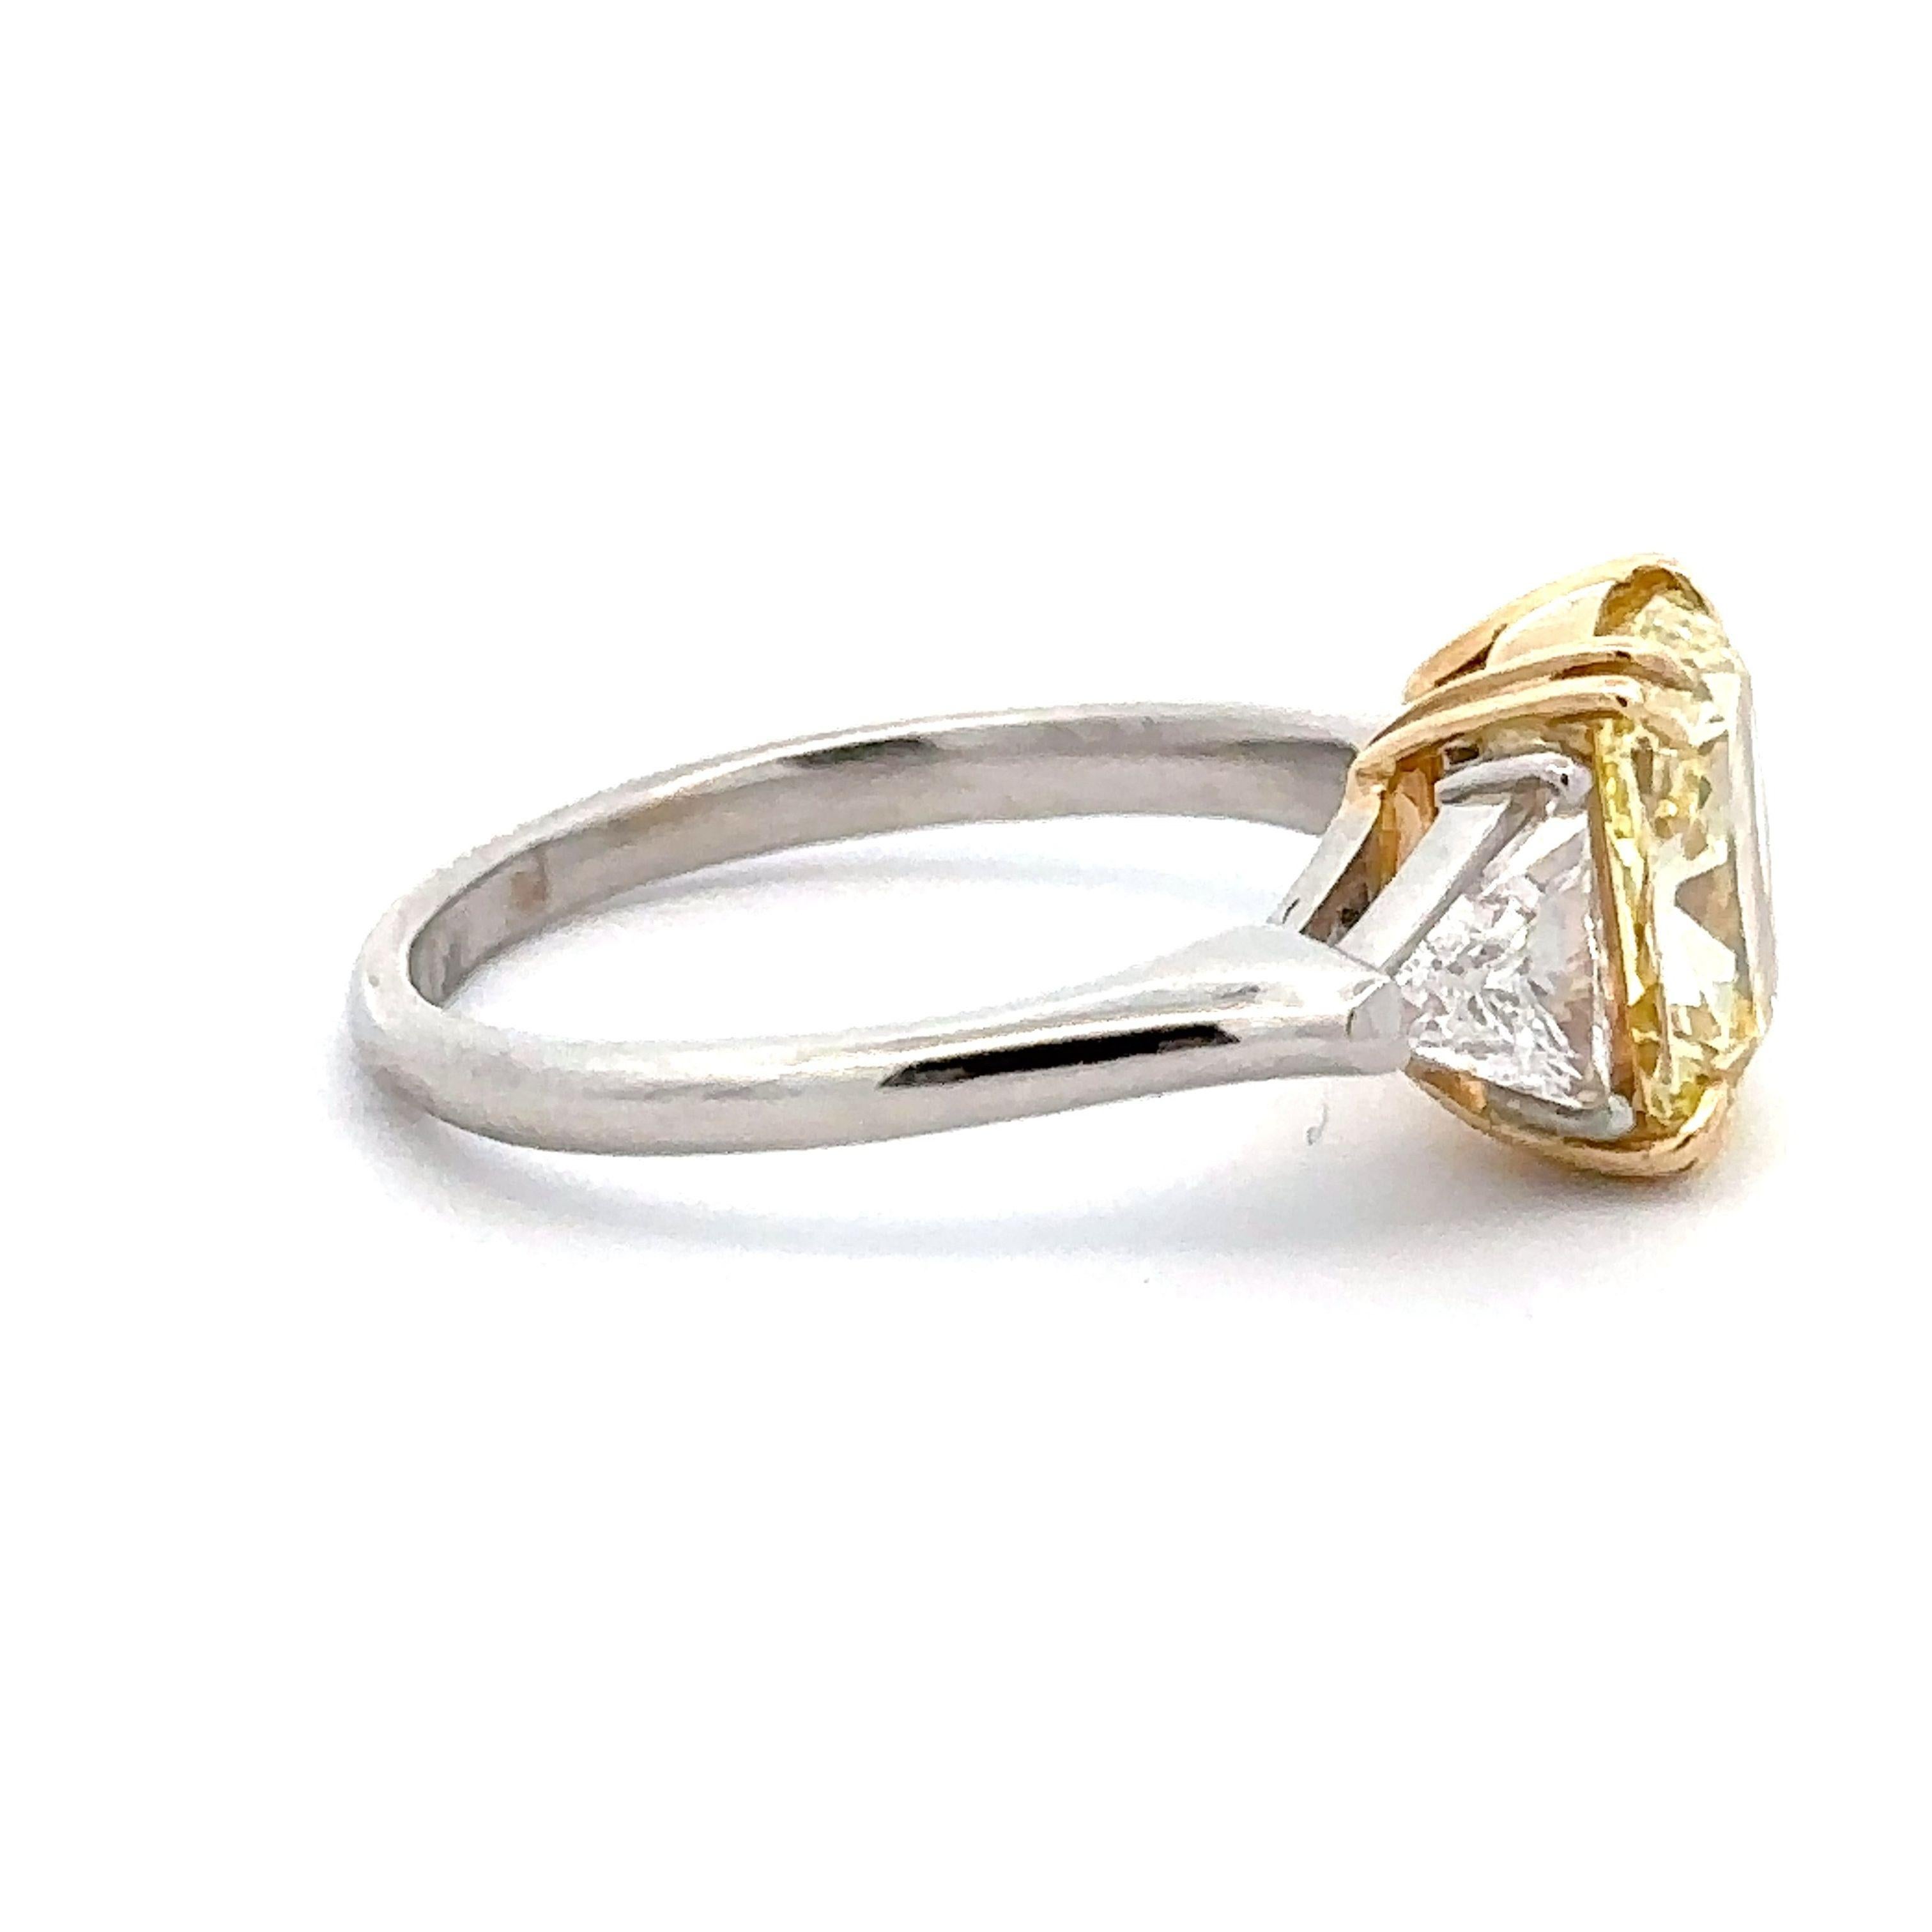 Introducing a 2.58 carat Fancy Yellow VVS2 G.I.A certified  Cushion Cut center diamond flanked by Trillion Cut diamond weighing 0.40 carat, This 3 stone ring is a captivating masterpiece that transcends the boundaries of elegance and sophistication.